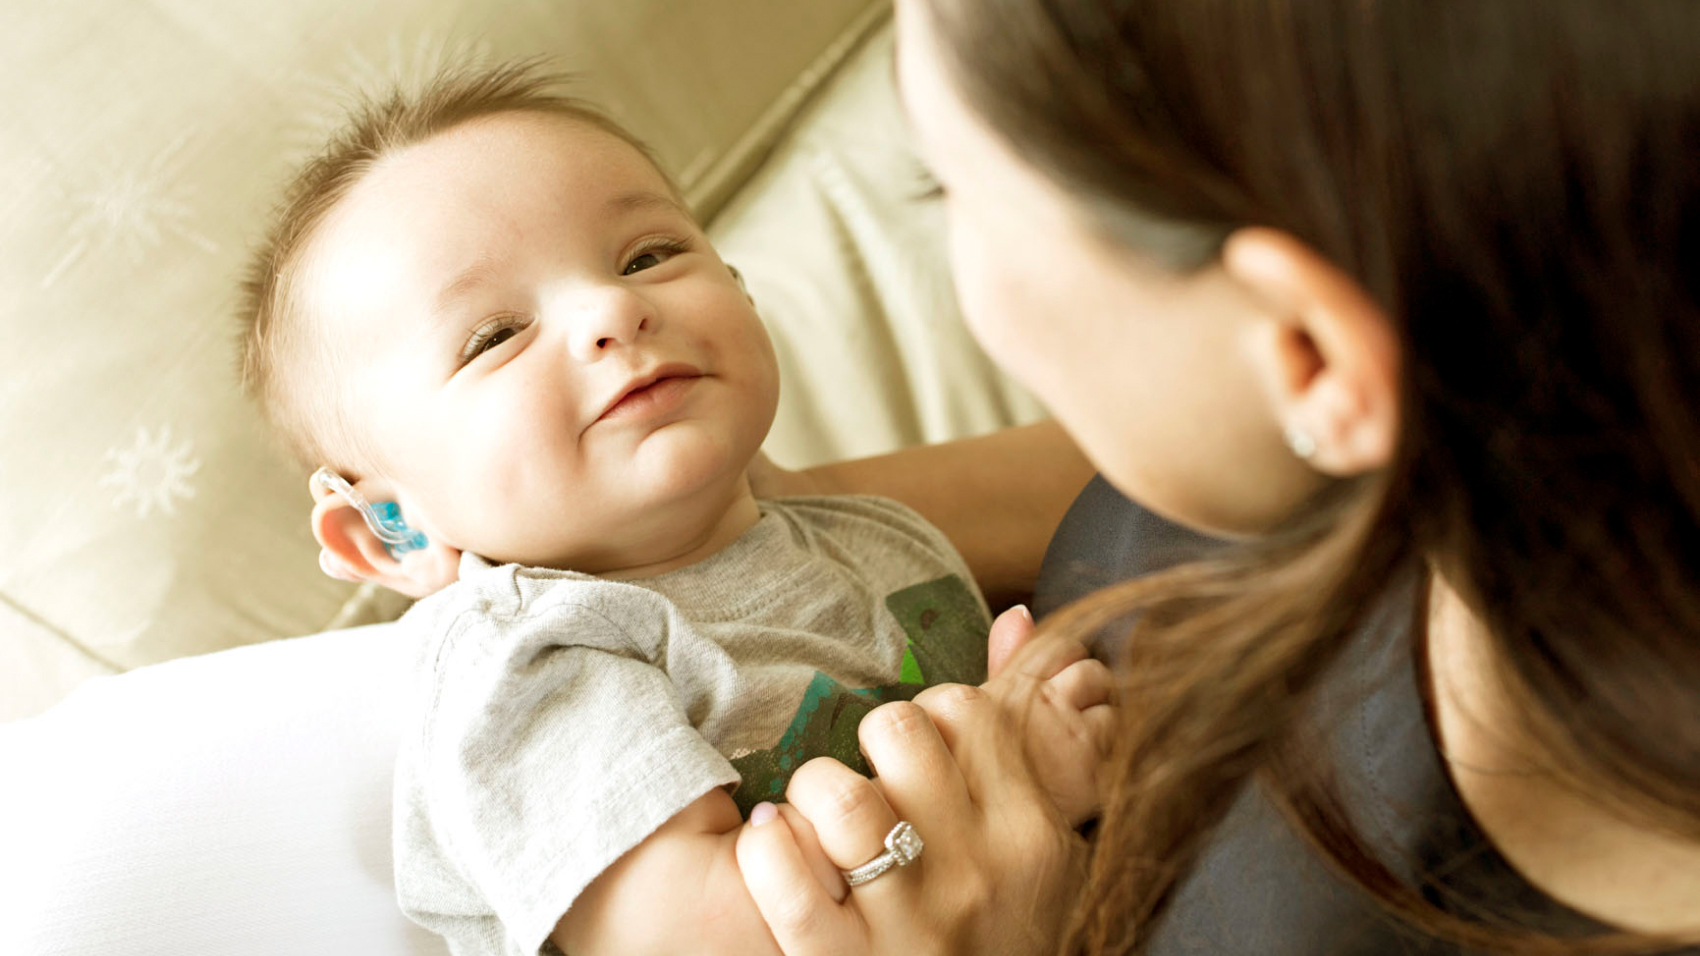 A woman holding a smiling baby